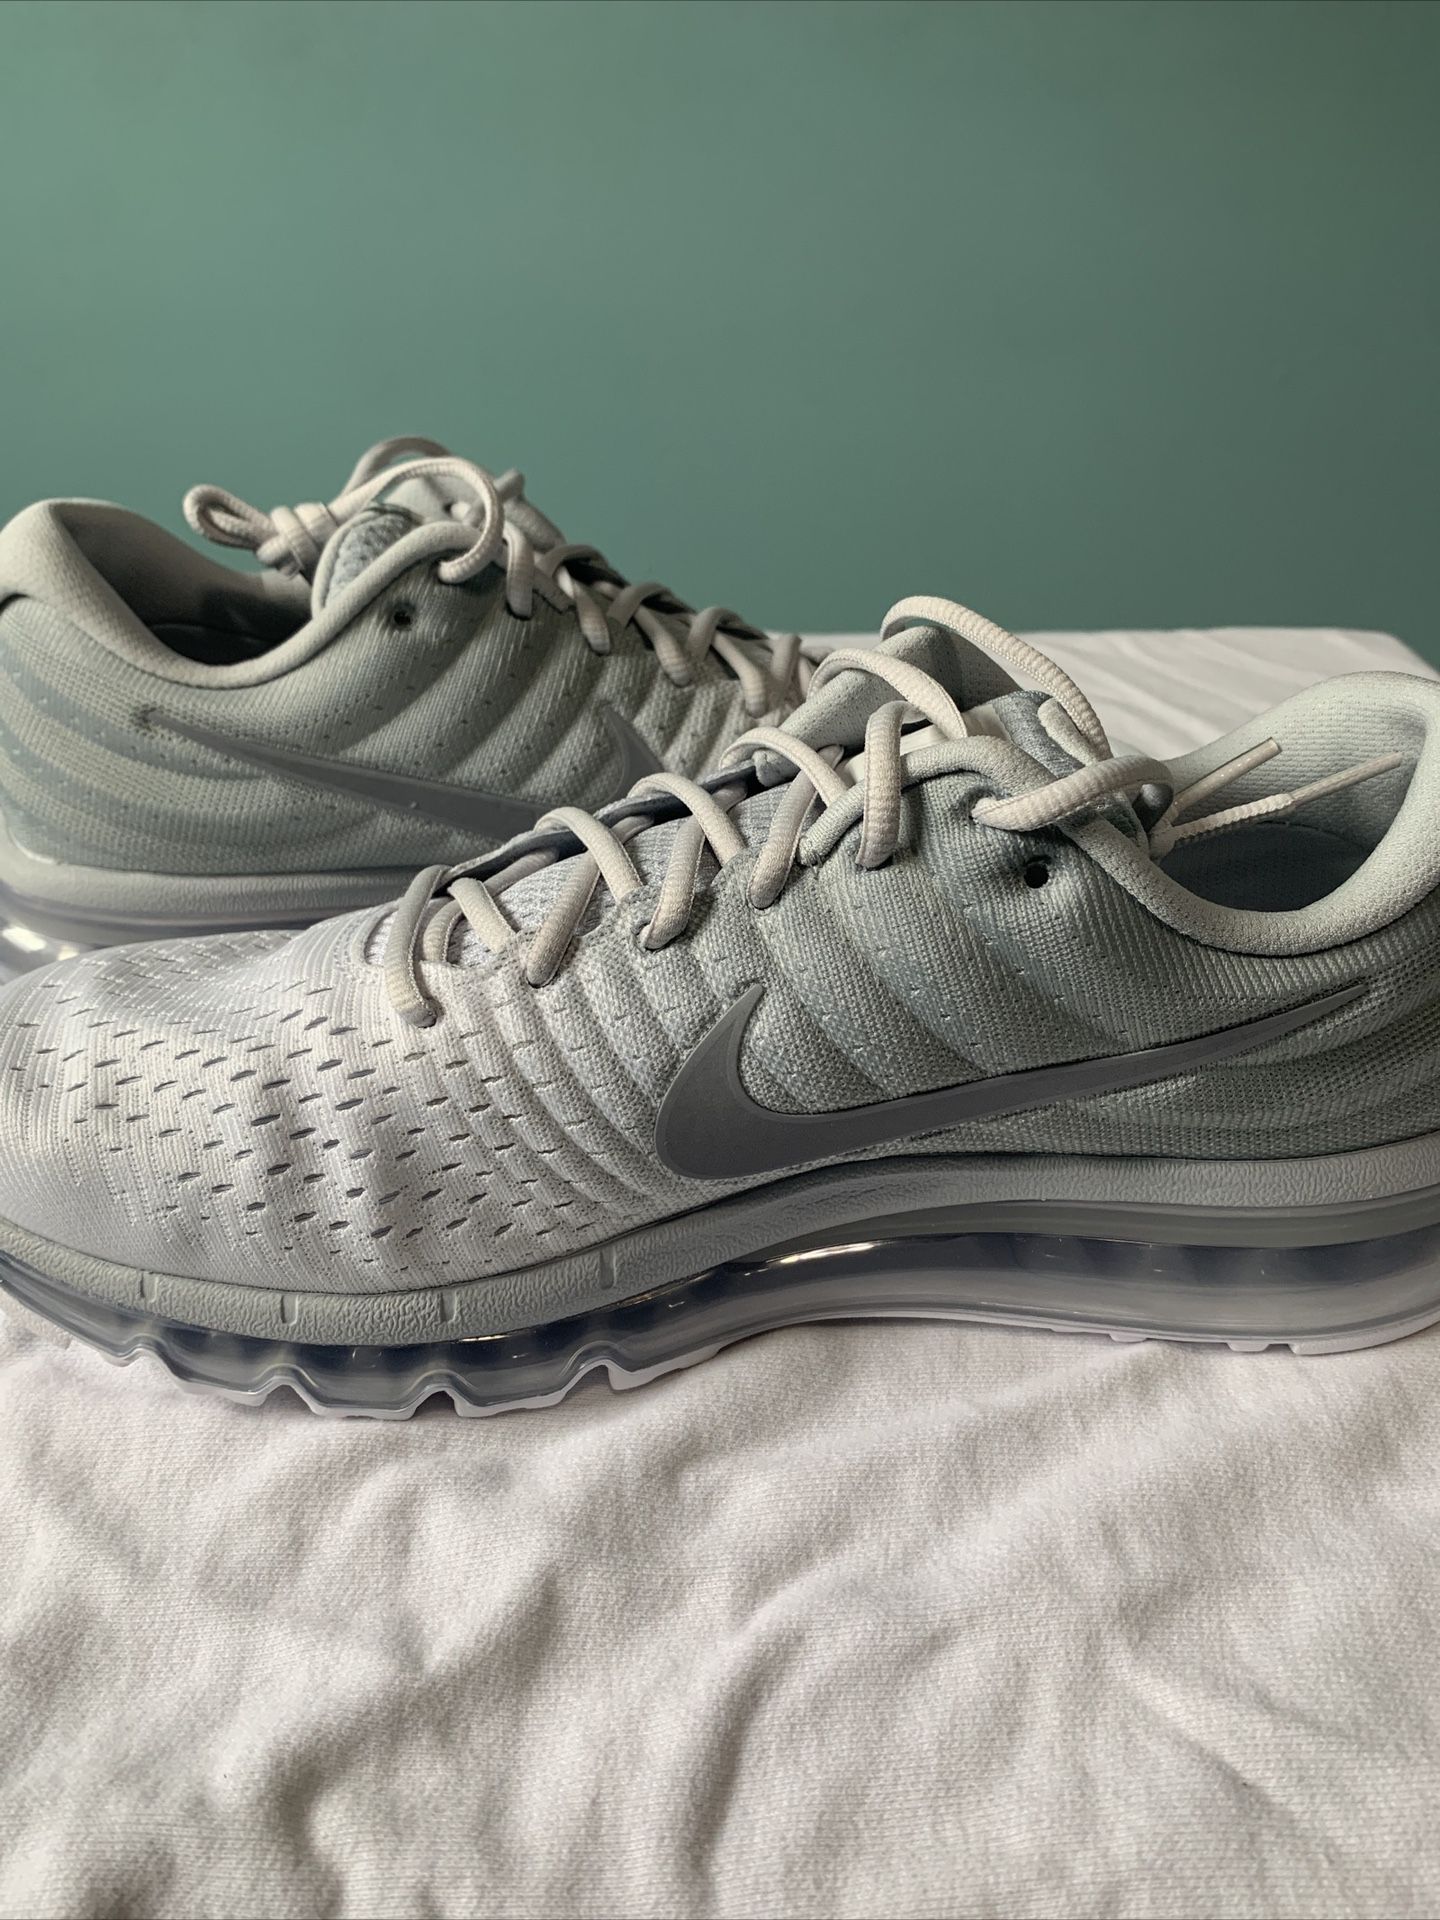 bar Espinas Borde Size 10.5 - Nike Air Max 2017 Pure Platinum - 849559-009 for Sale in  Nashville, TN - OfferUp